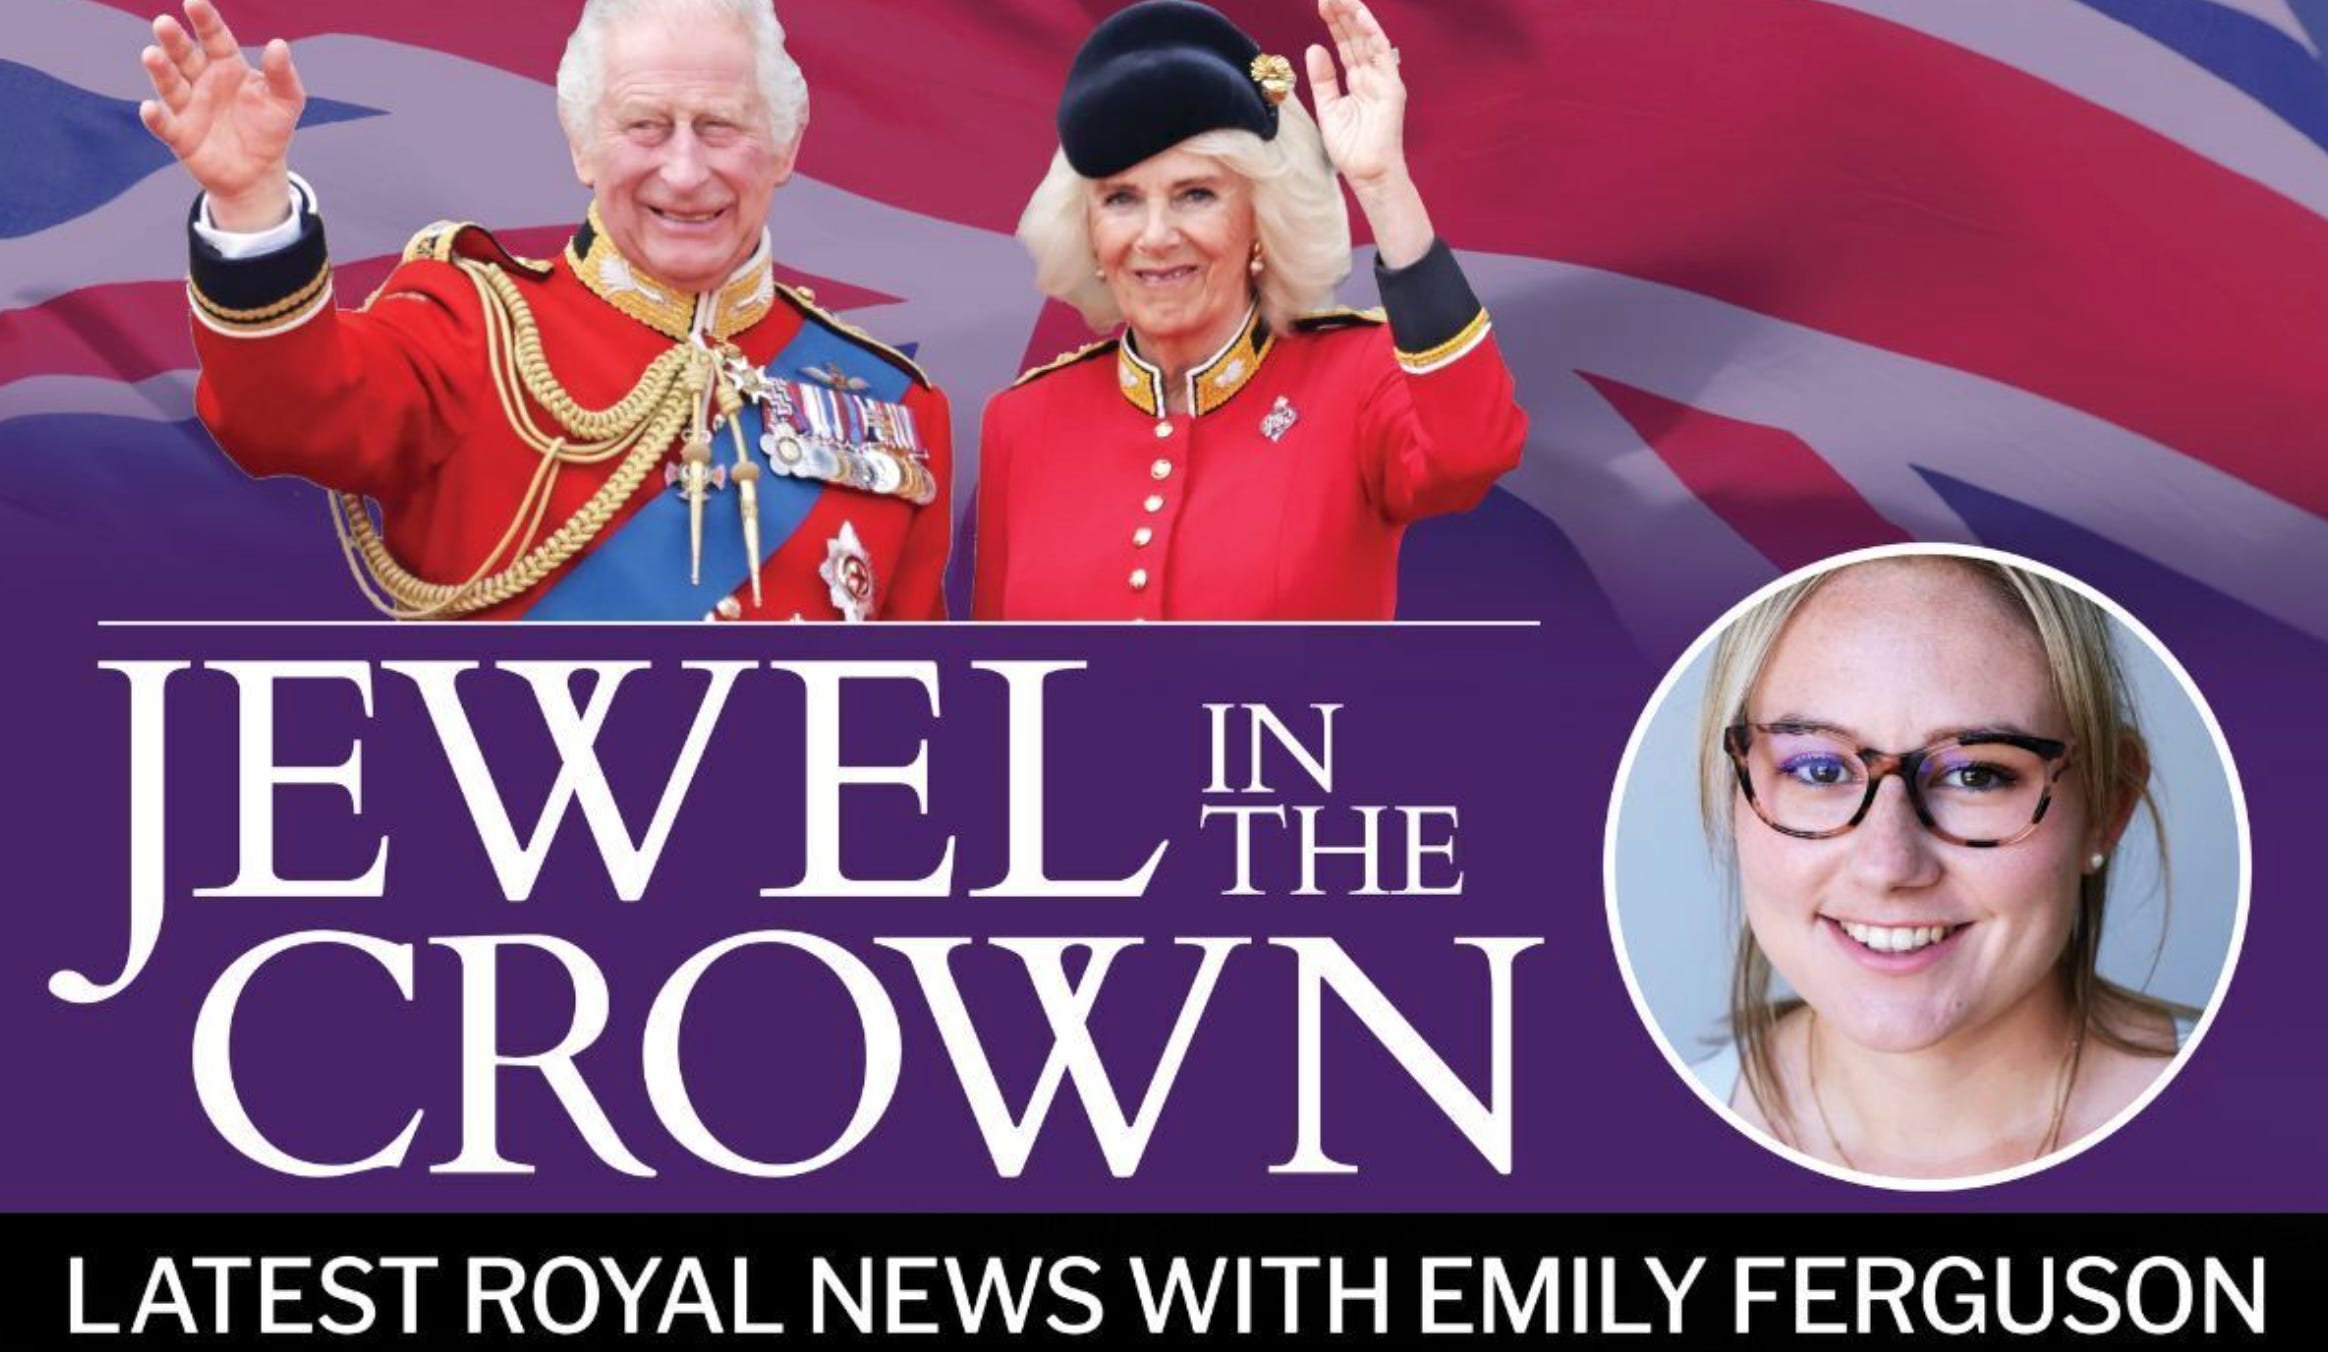 Welcome to Jewel in the Crown with Emily Ferguson